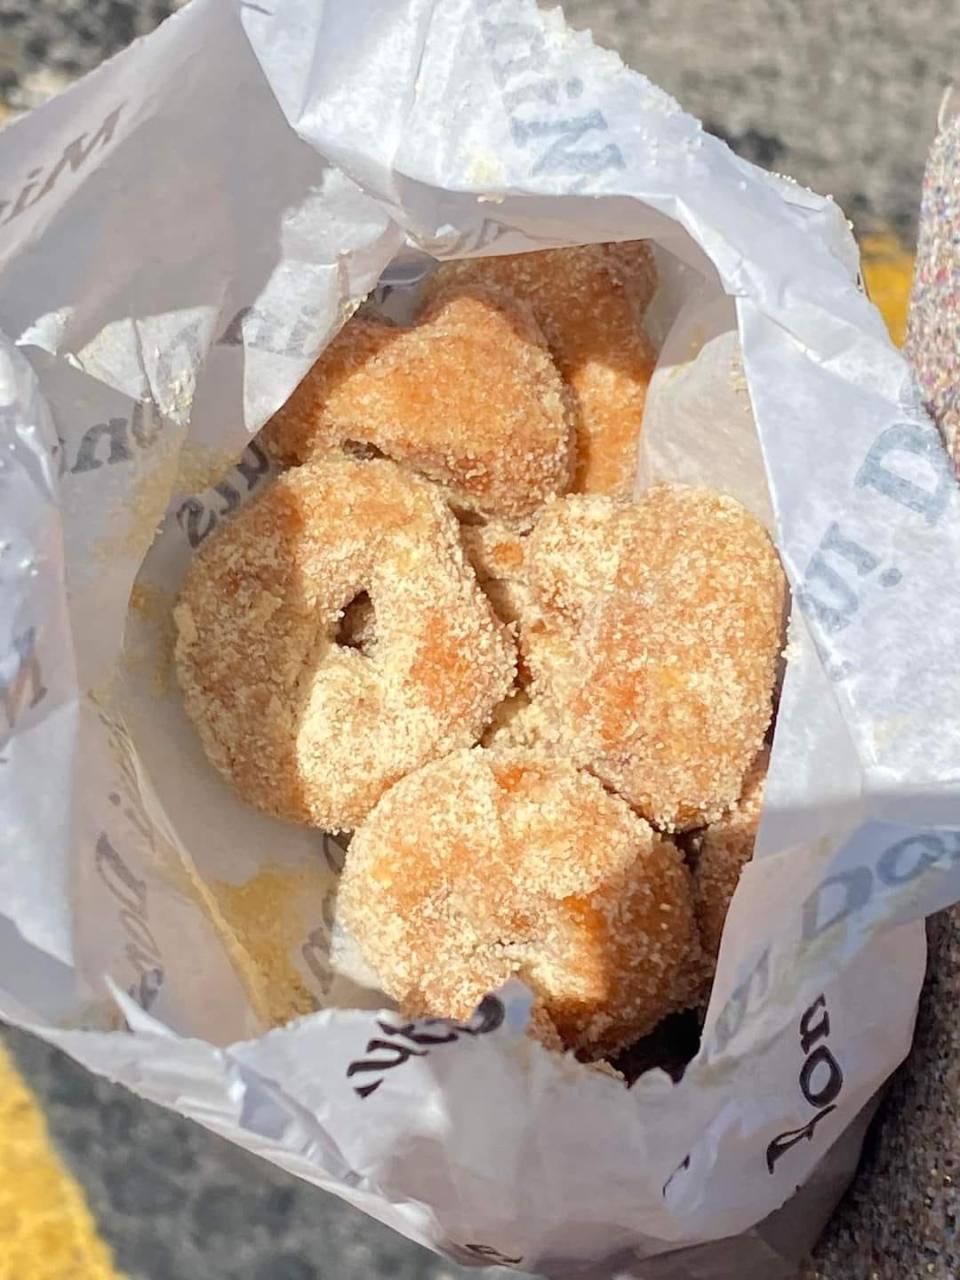 Mini donuts from Johnnie O's Donuts is seen in this undated photo in Springfield.